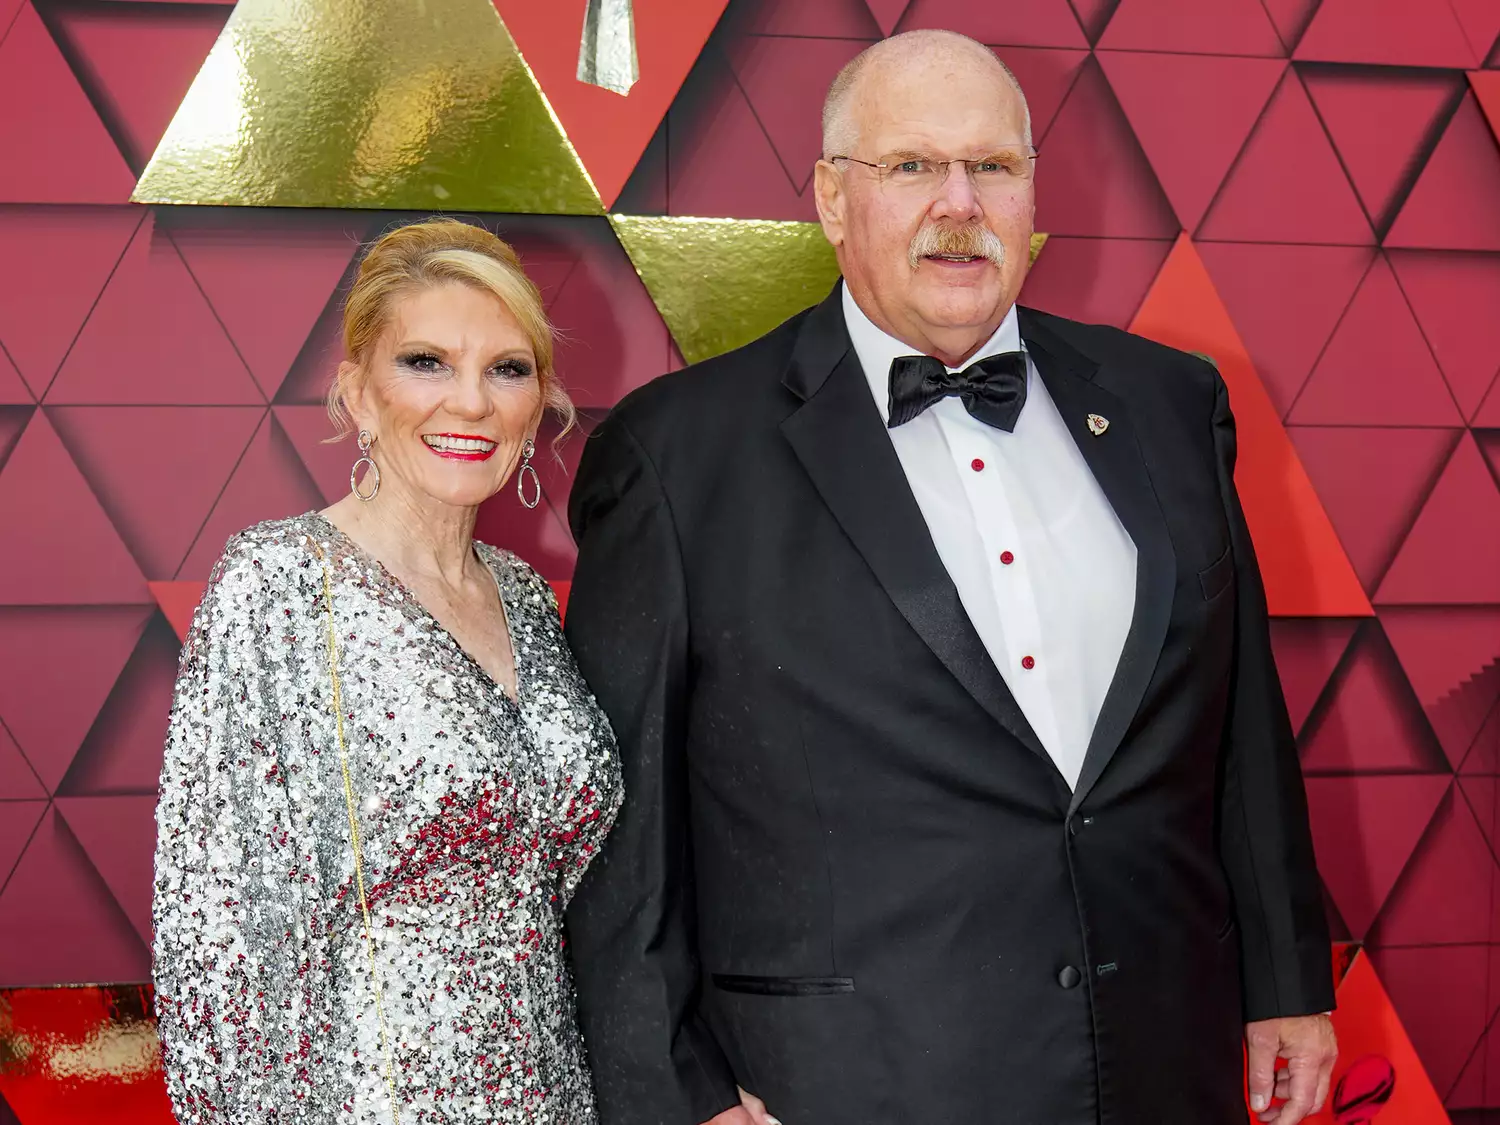 Andy Reid and wife Tammy Celebrates 42 years Marriage Anniversary - As Patrick Mahomes delights  coach with a surprising  gift